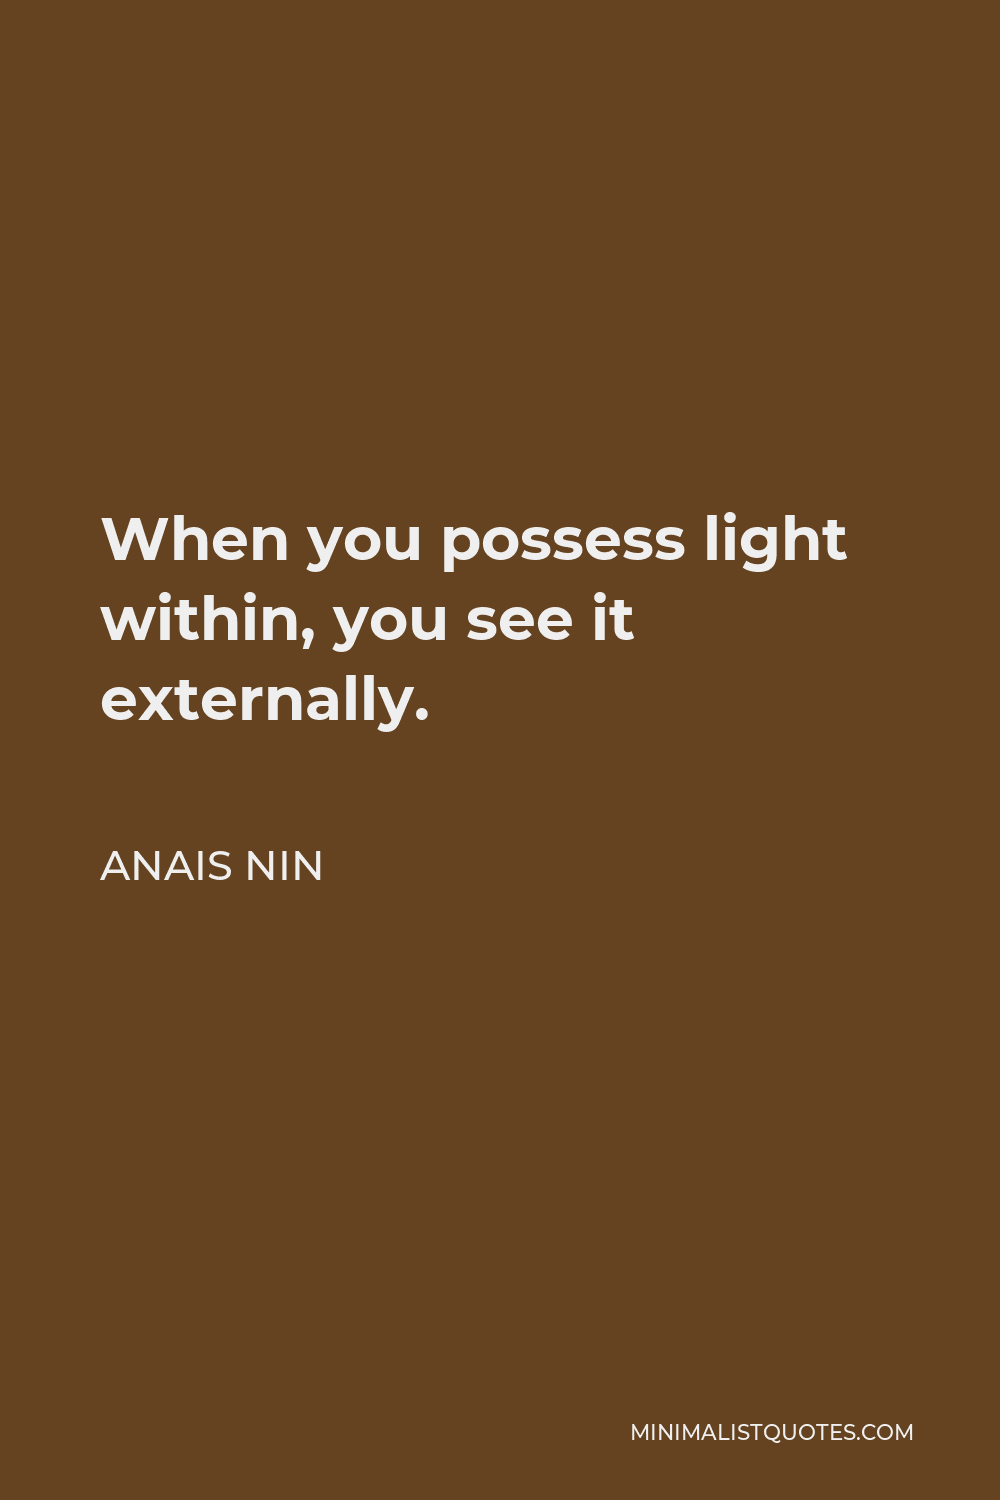 Anais Nin Quote - When you possess light within, you see it externally.